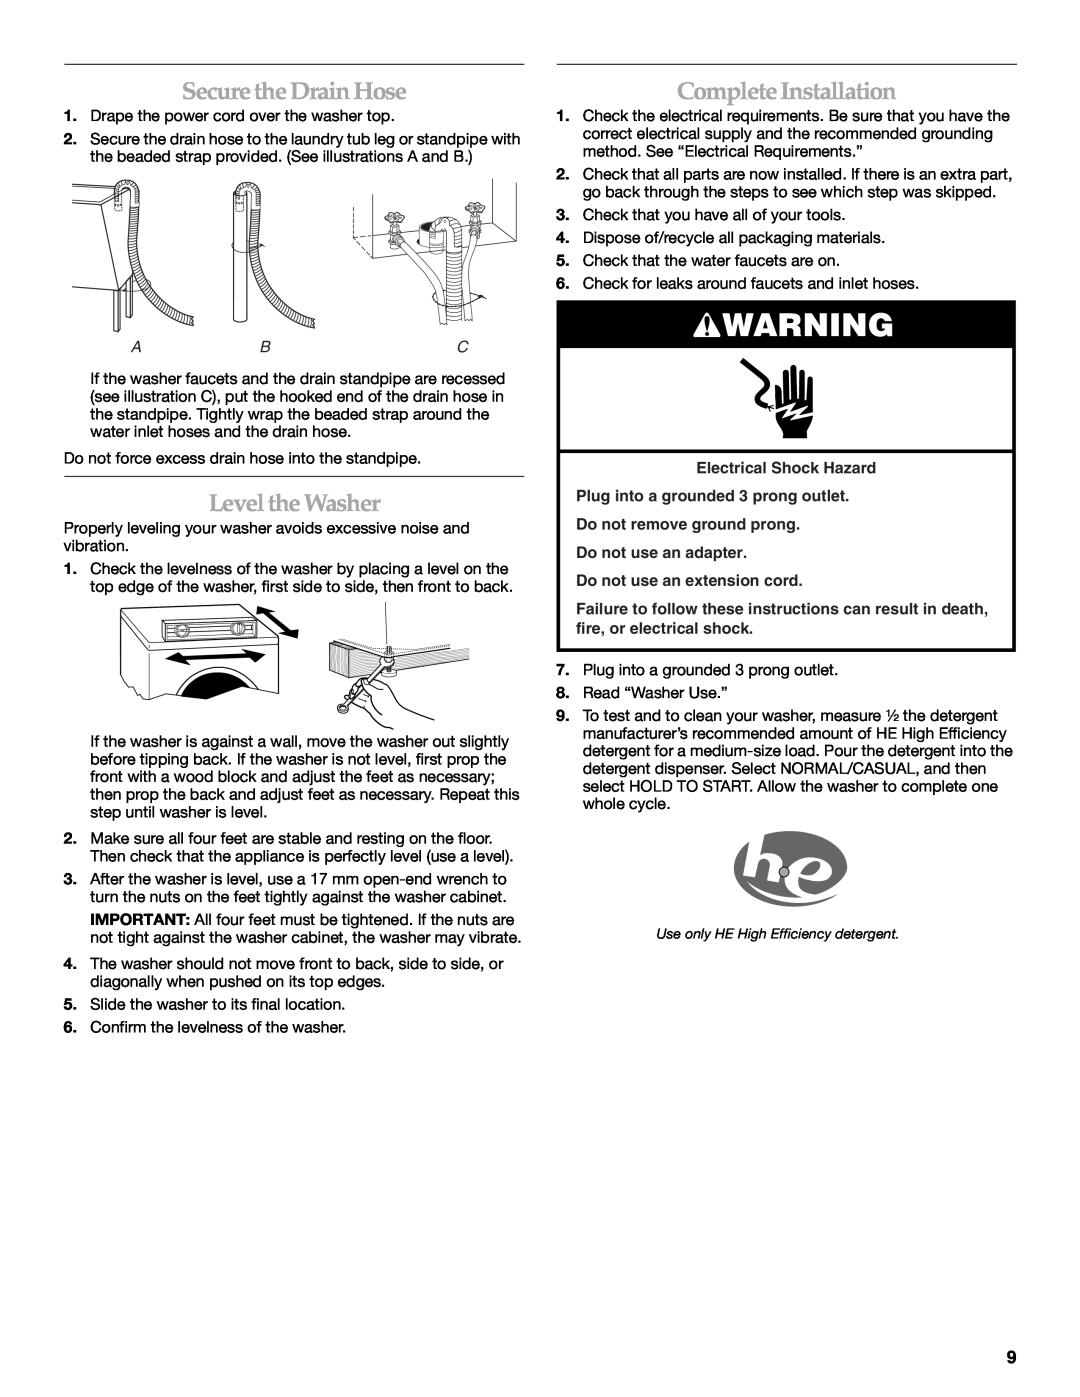 Maytag 8182969 manual Secure the Drain Hose, Level the Washer, Complete Installation, Do not use an extension cord 